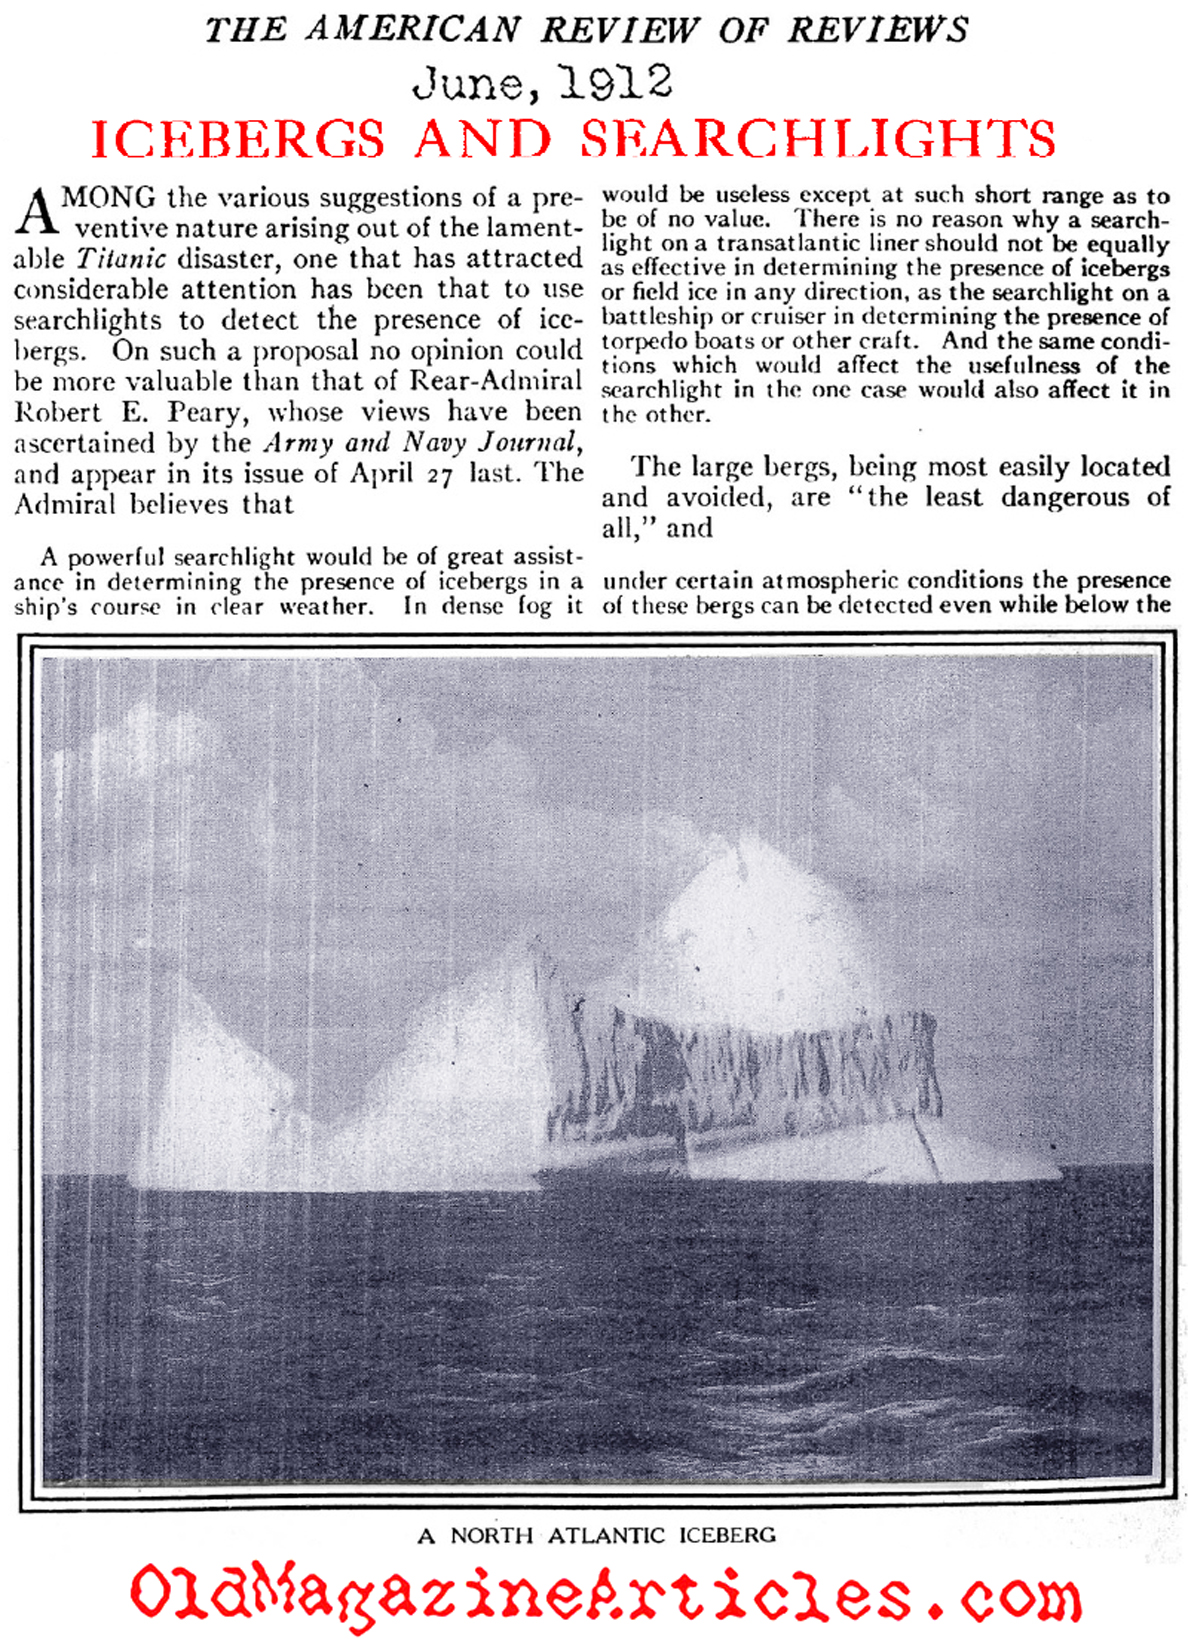 Admiral Peary on Icebergs and the <em>Titanic</em> Catastrophe (Review of Reviews, 1912)